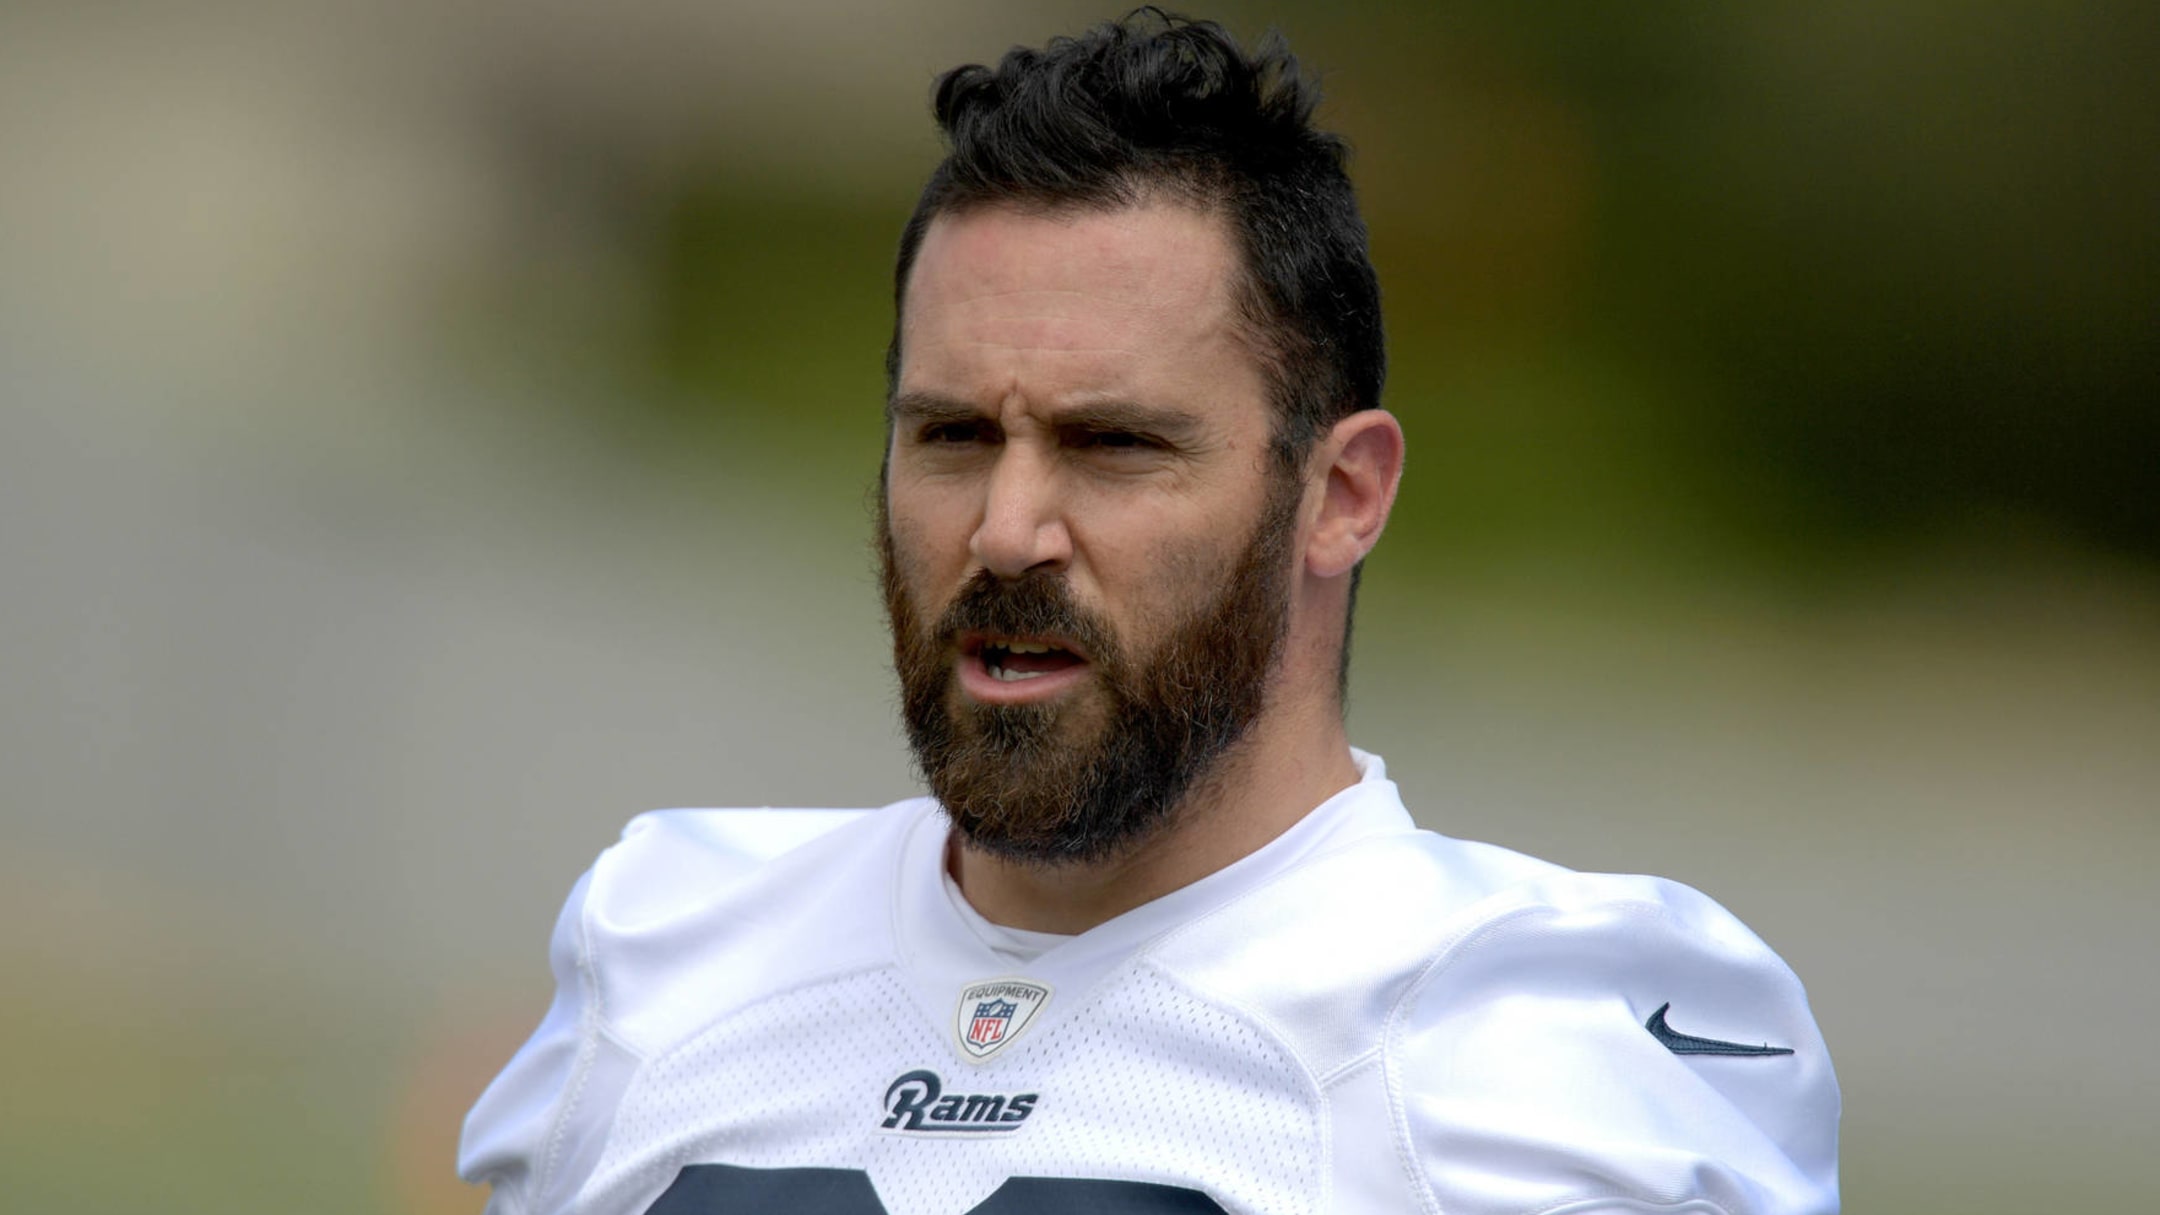 Eric Weddle's contract with Rams includes ice cream clause